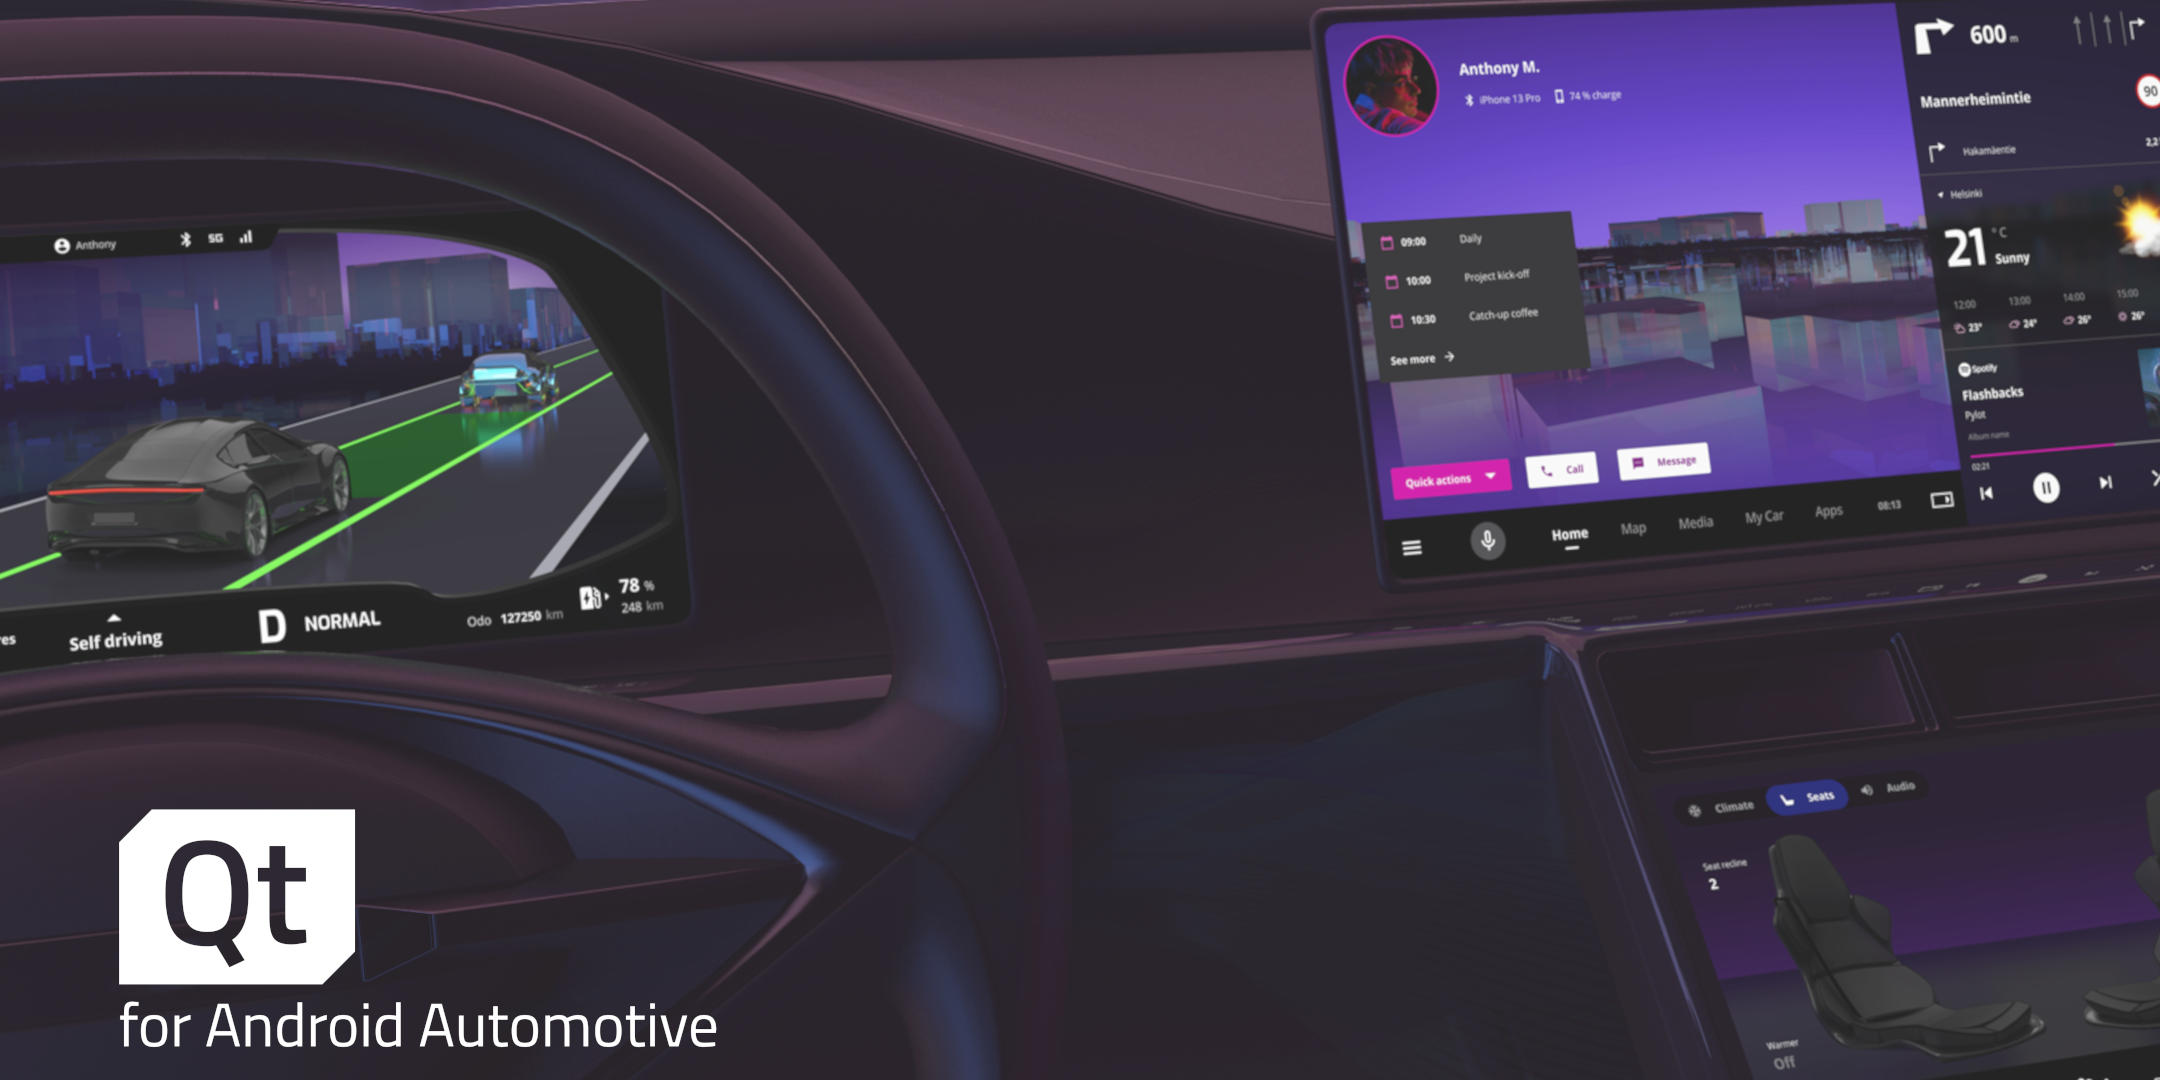 Qt for Android Automotive 6.5.1 is released